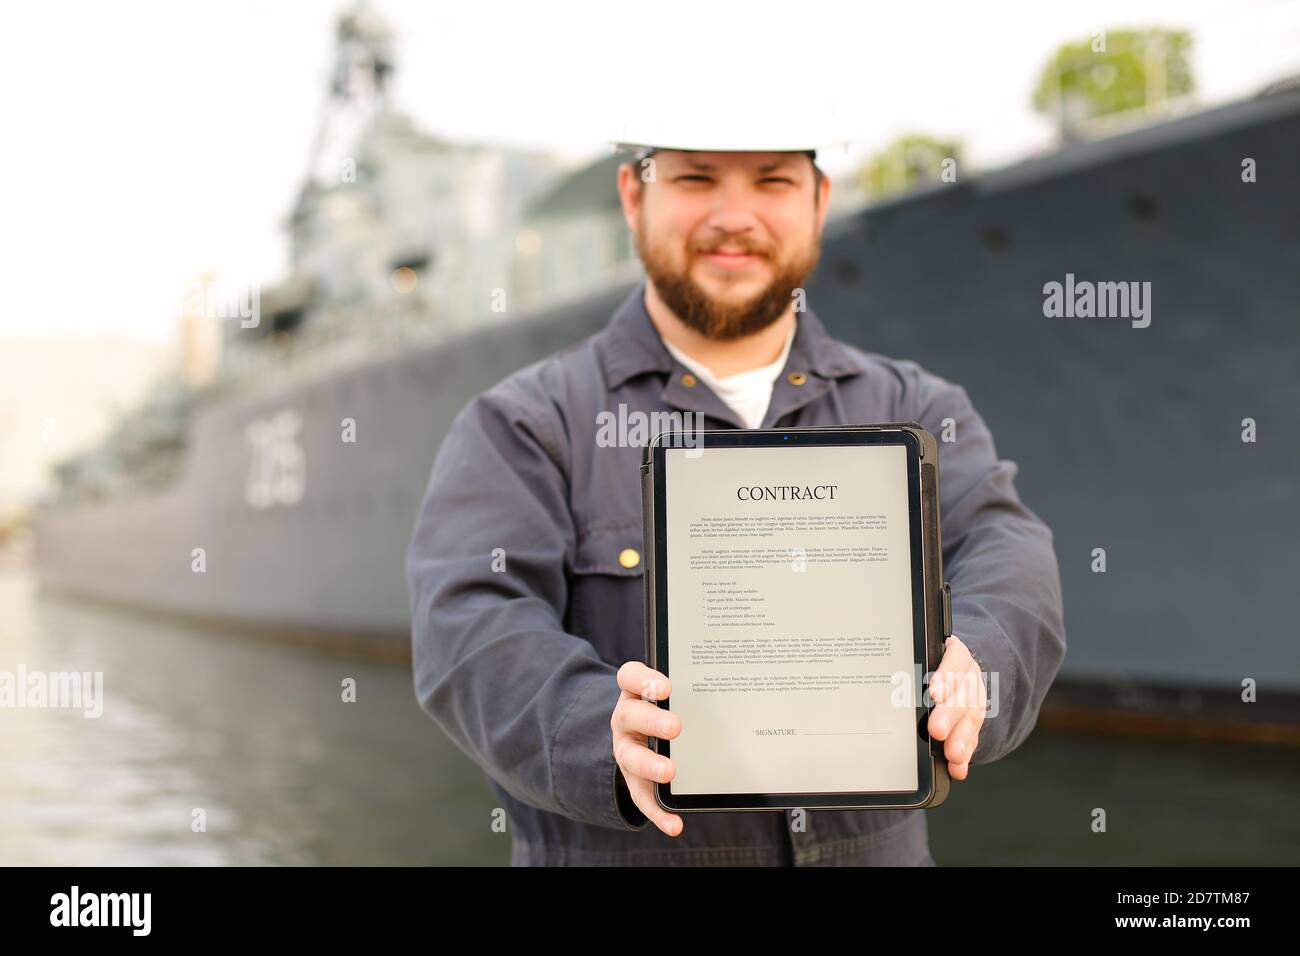 Focus on contract, captain showing document on tablet near vessel in background. Stock Photo